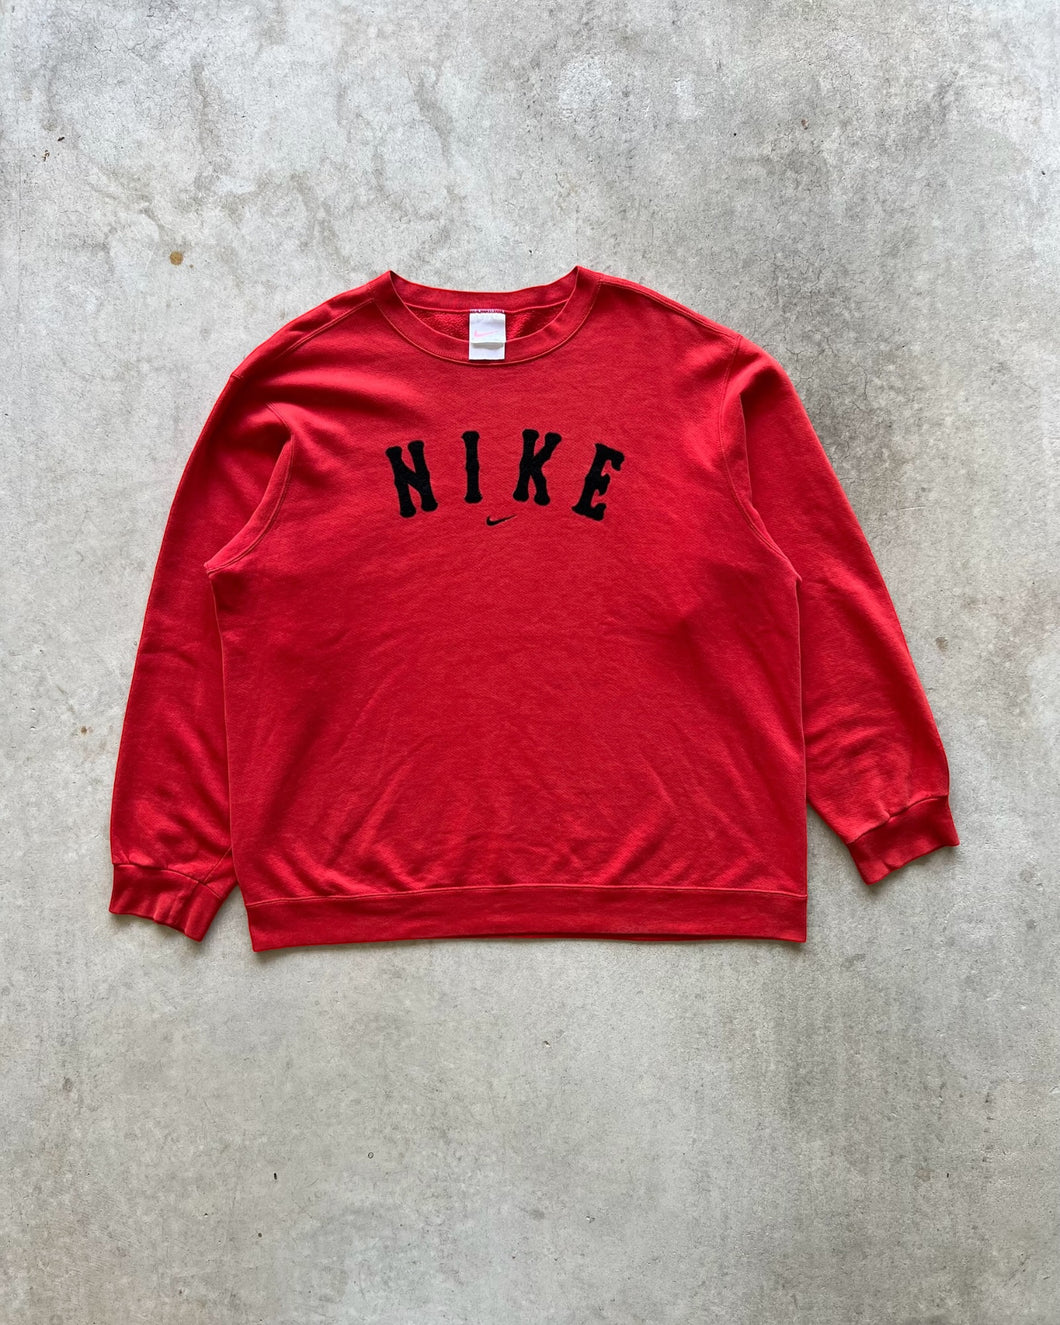 Vintage Nike Red Embroidered Spellout Sweatshirt - XL